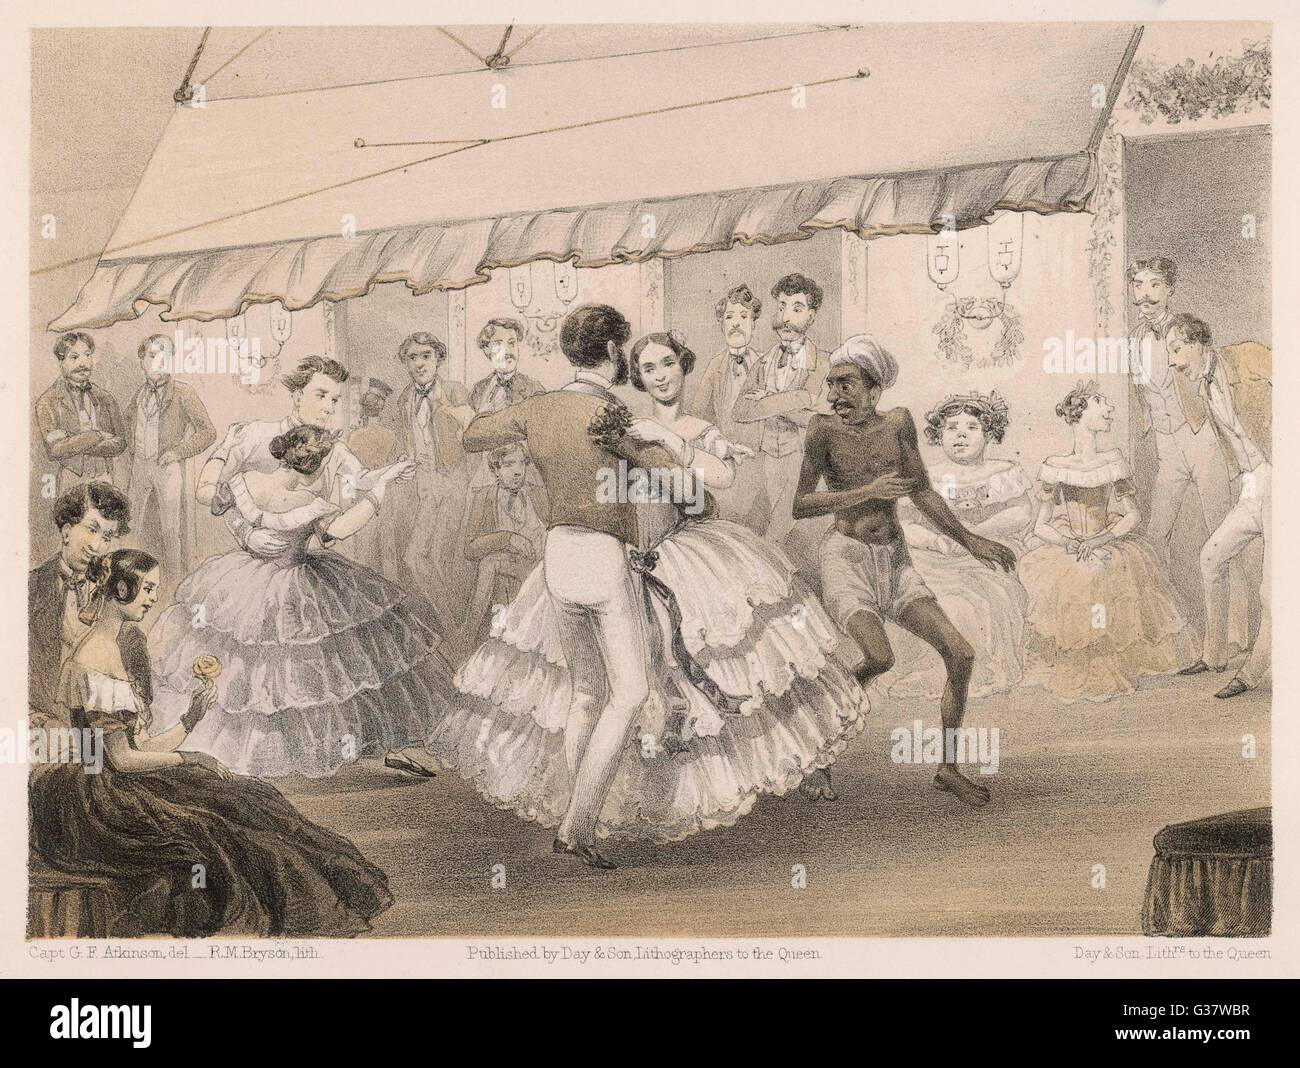 Dancing at a ball in British India, 1860 Stock Photo